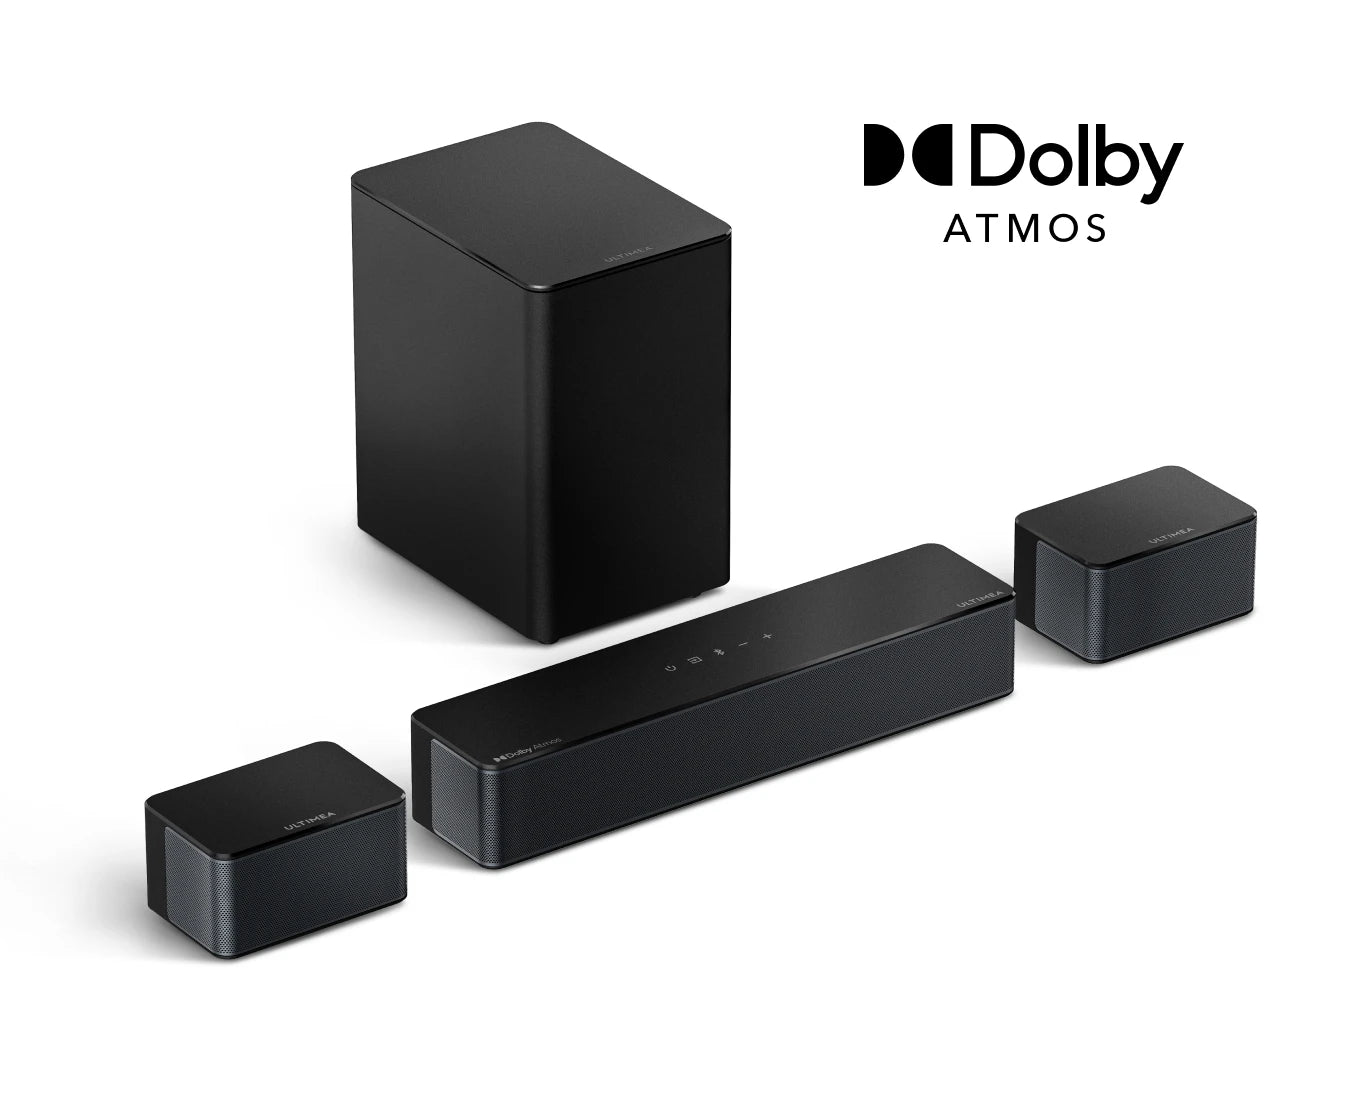 Hey there! Welcome to our Poseidon D60 soundbar operation video